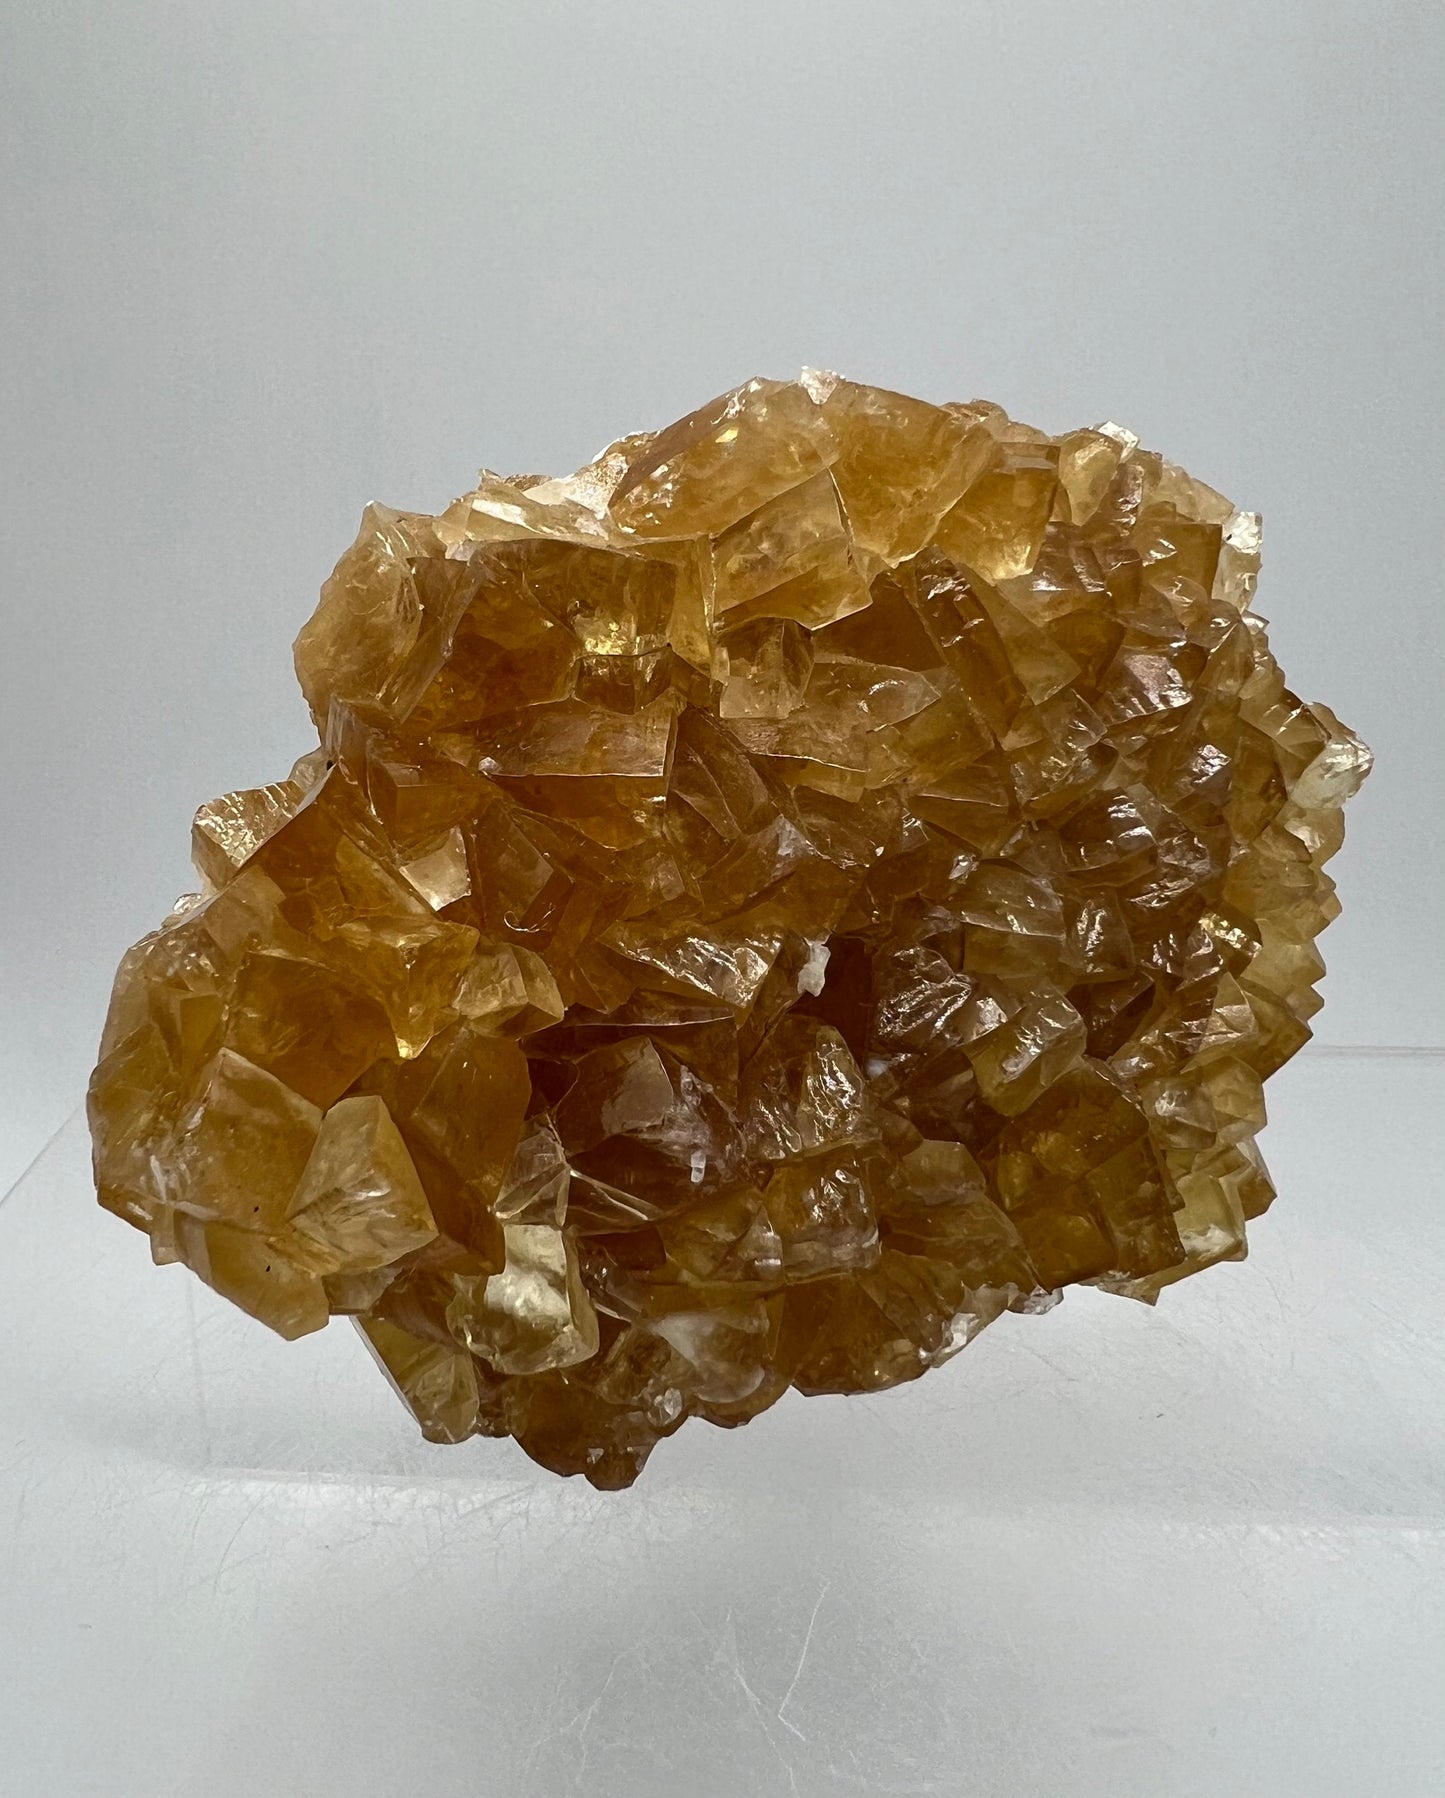 Beautiful Honey Calcite Cubes Specimen. Gorgeous Bright Gold Colors. Very Nice Quality Crystal Cluster.